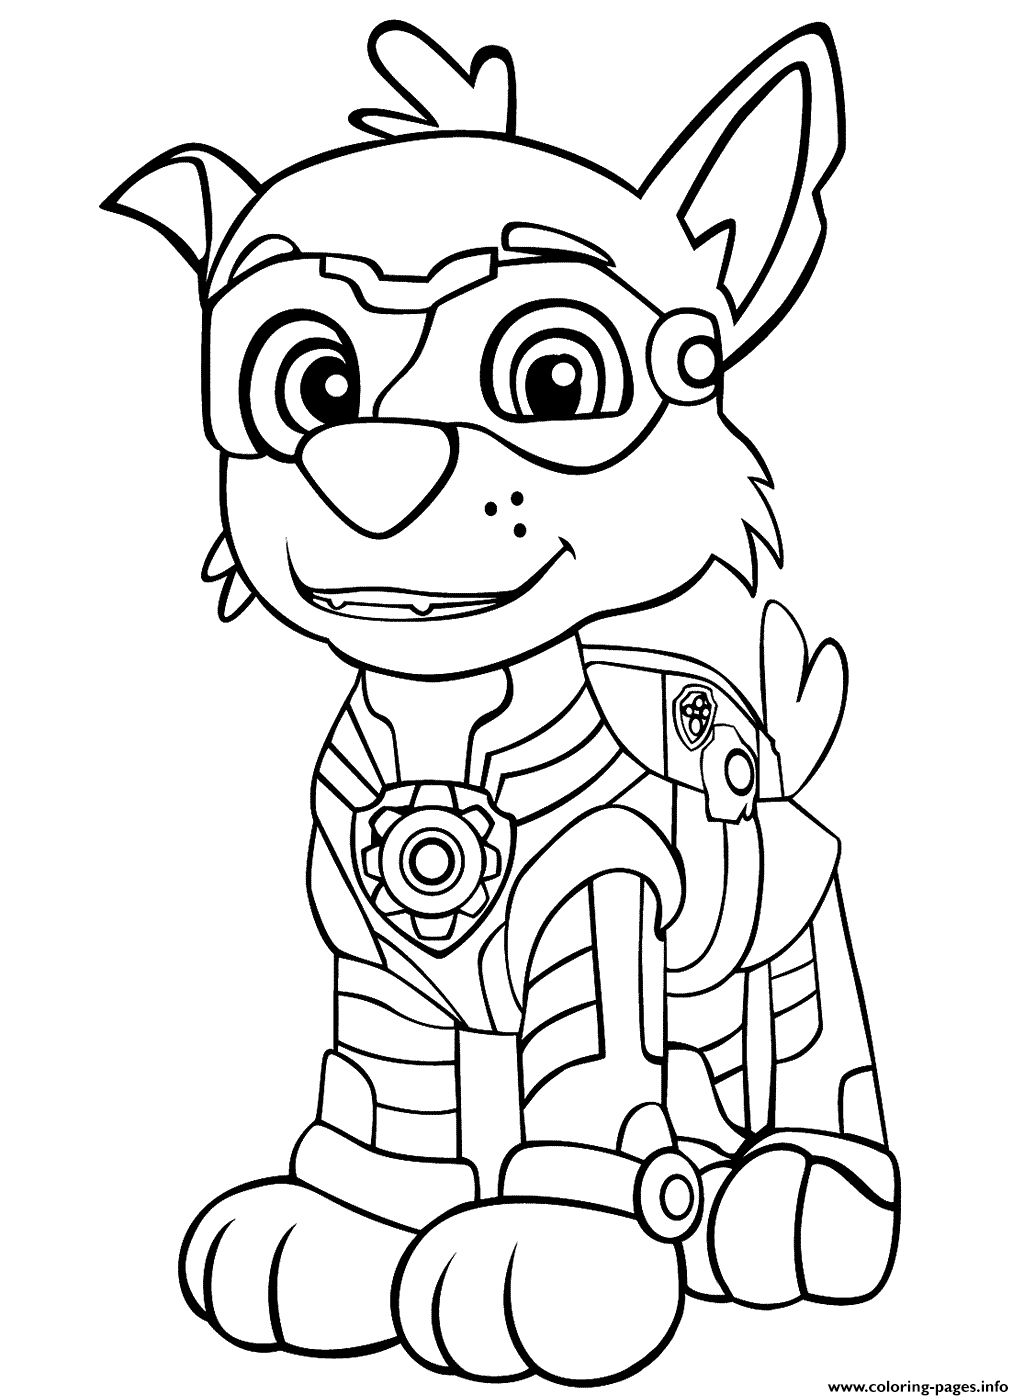 Paw Patrol Mighty Pups Rockys coloring